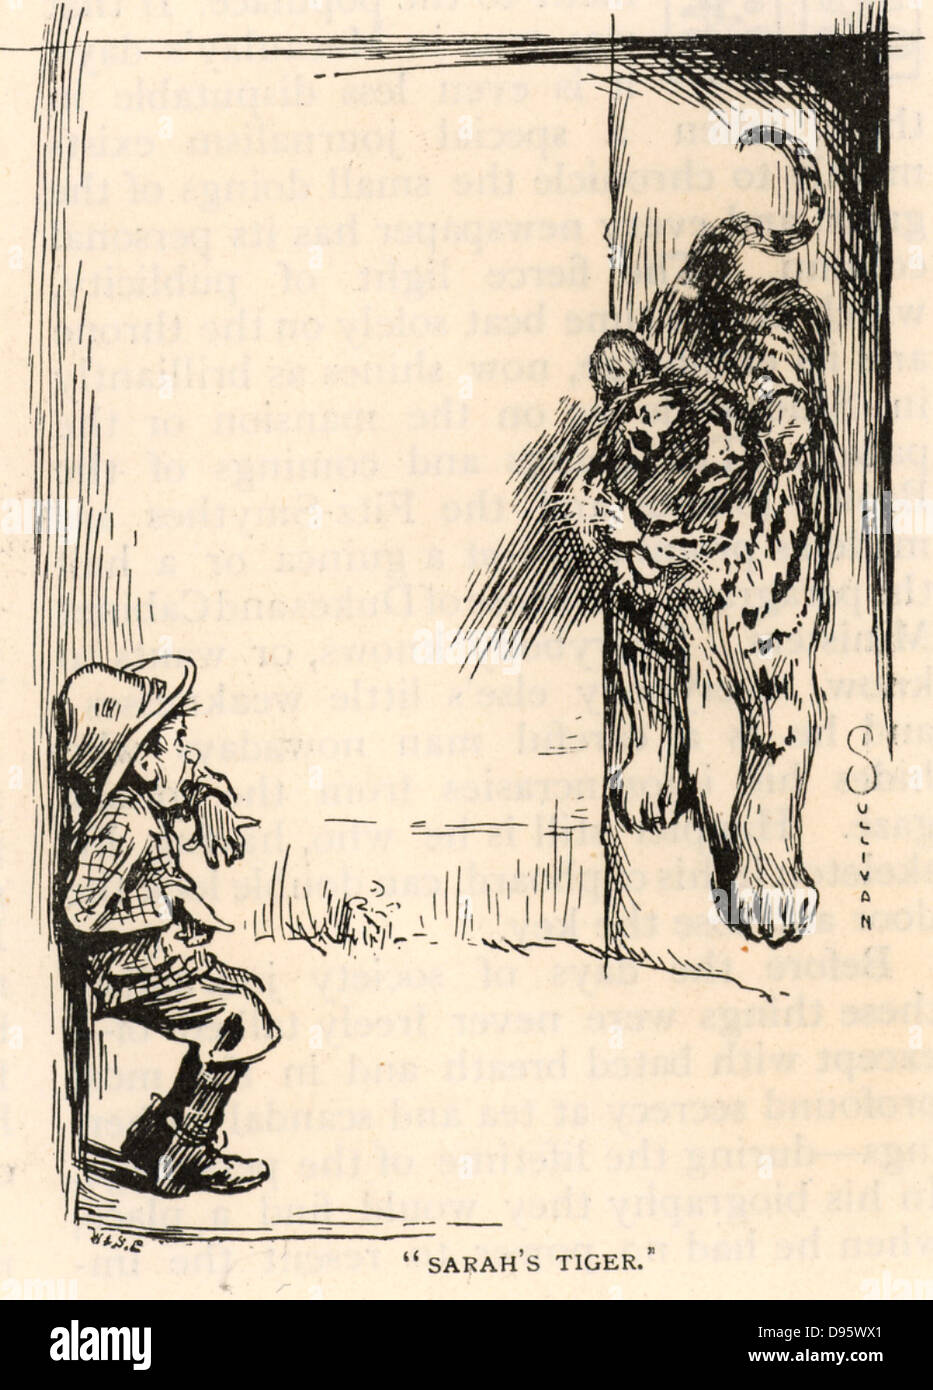 Sarah's Tiger: Sarah Bernhardt (born Henriette Rosine Bernard - 1844-1923) the great French actress had a penchant for exotic pets.  The cartoonist here shows a small boy terrfied by her pet tiger.  Engraving from 'The Strand Magazine' London, 1891. Stock Photo